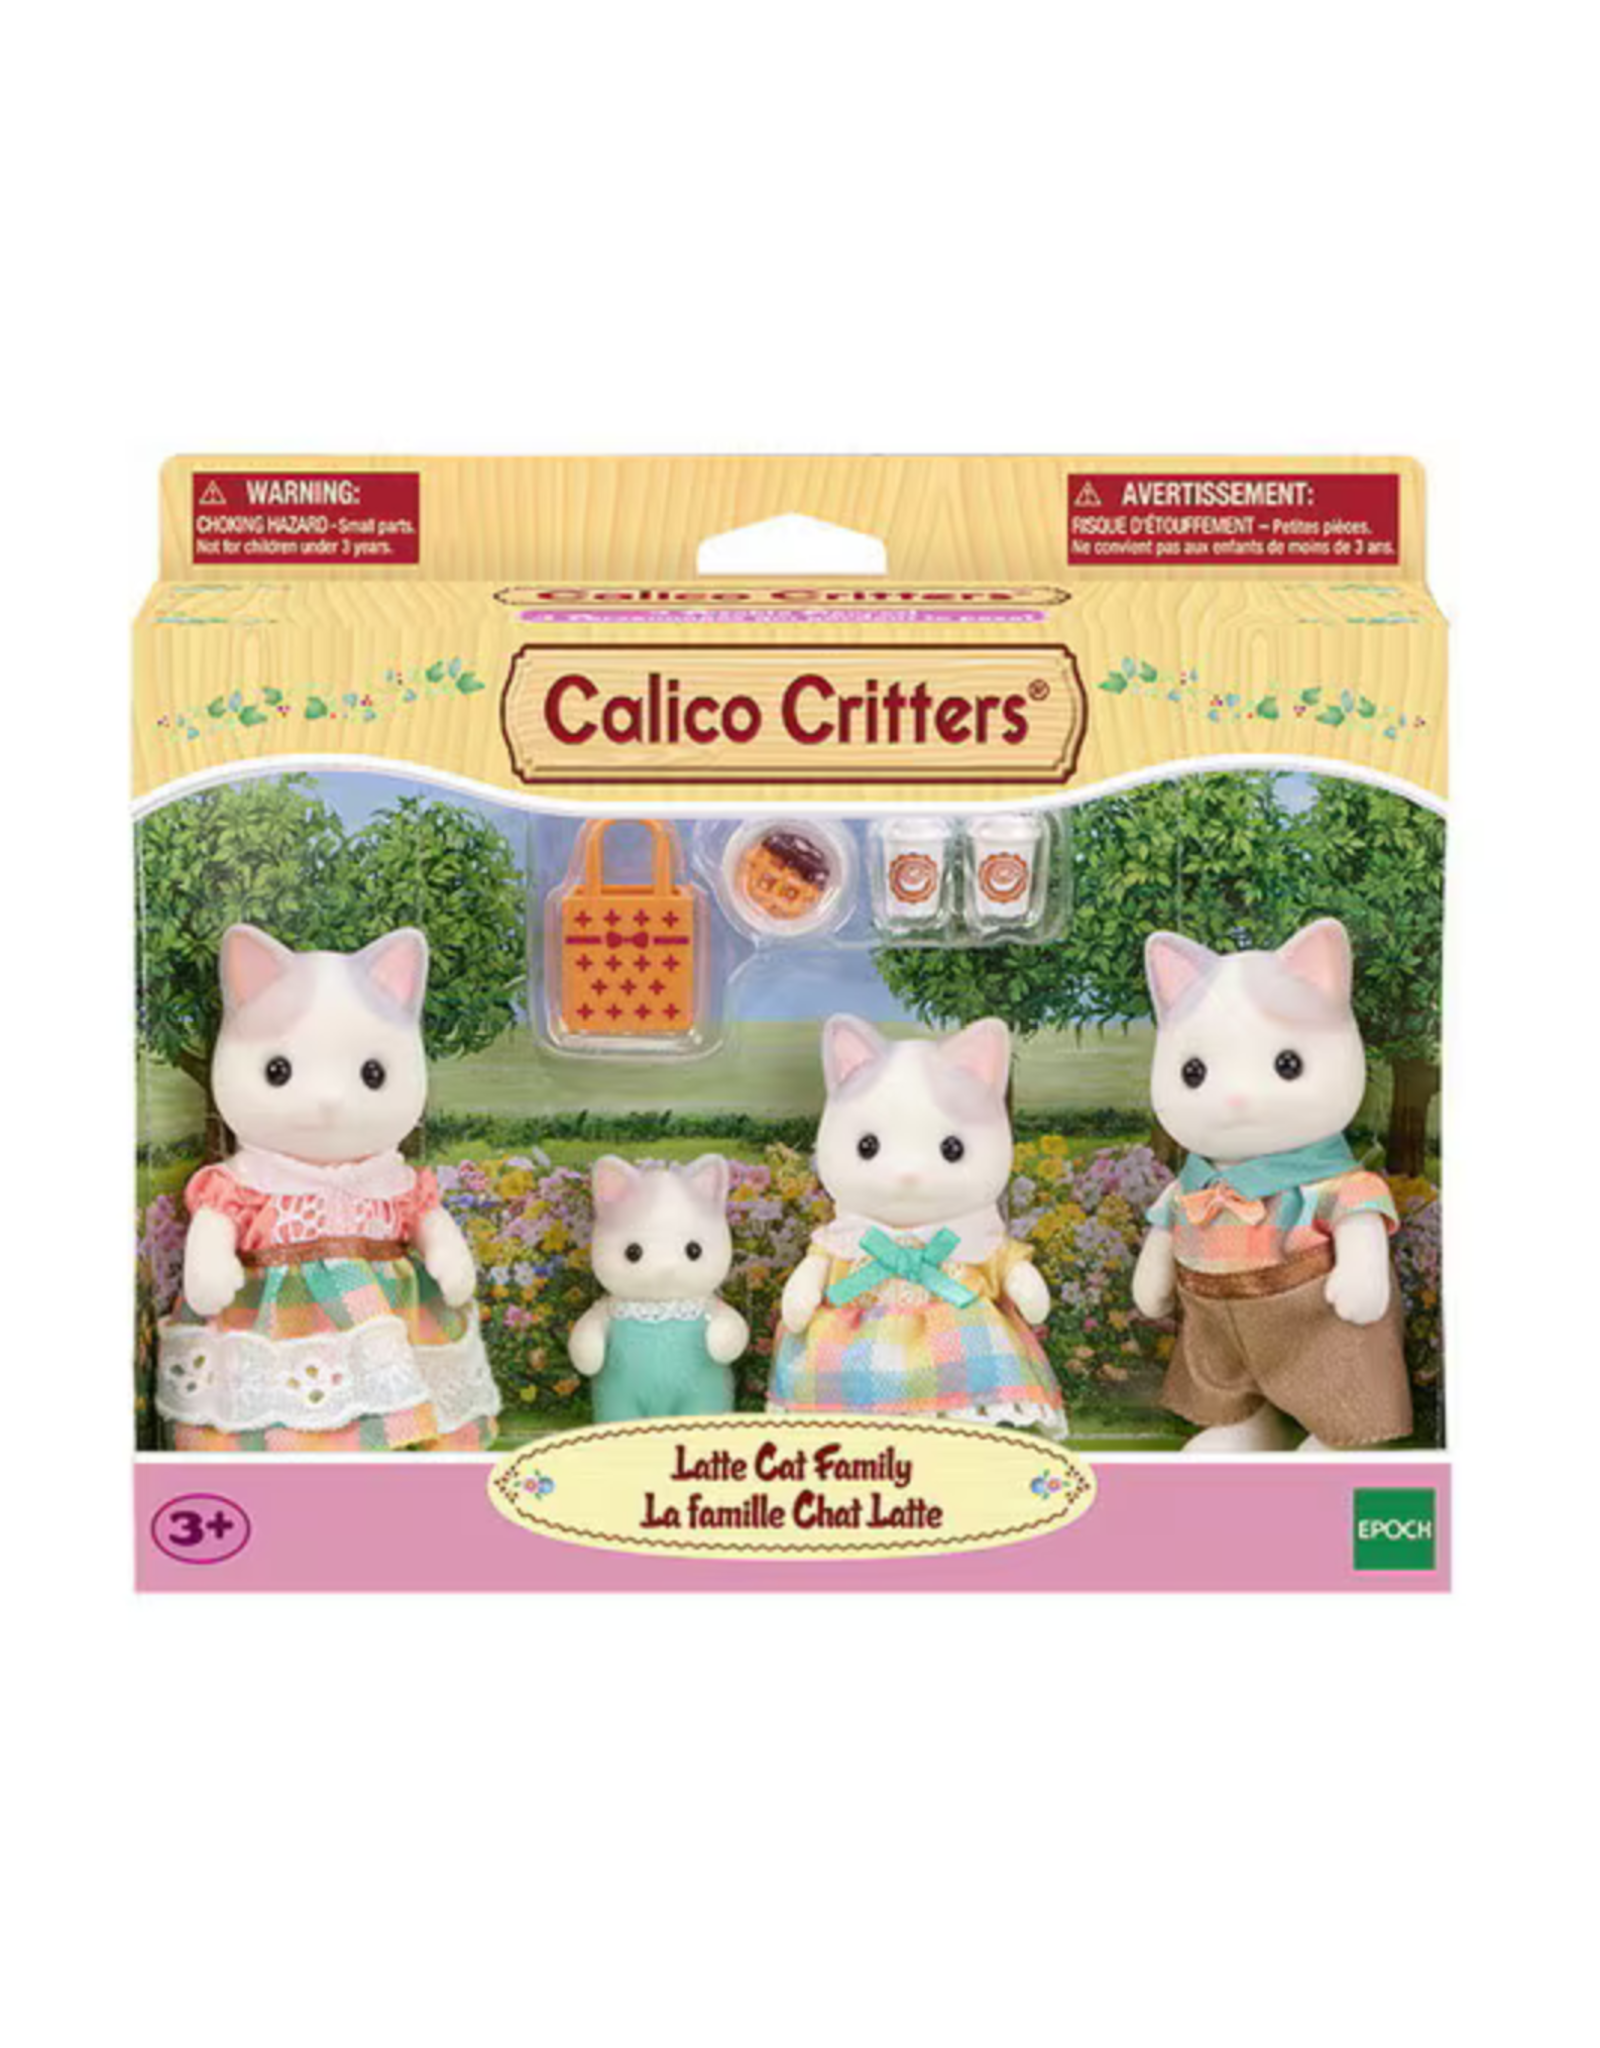 Calico Critters: Latte Cat Family